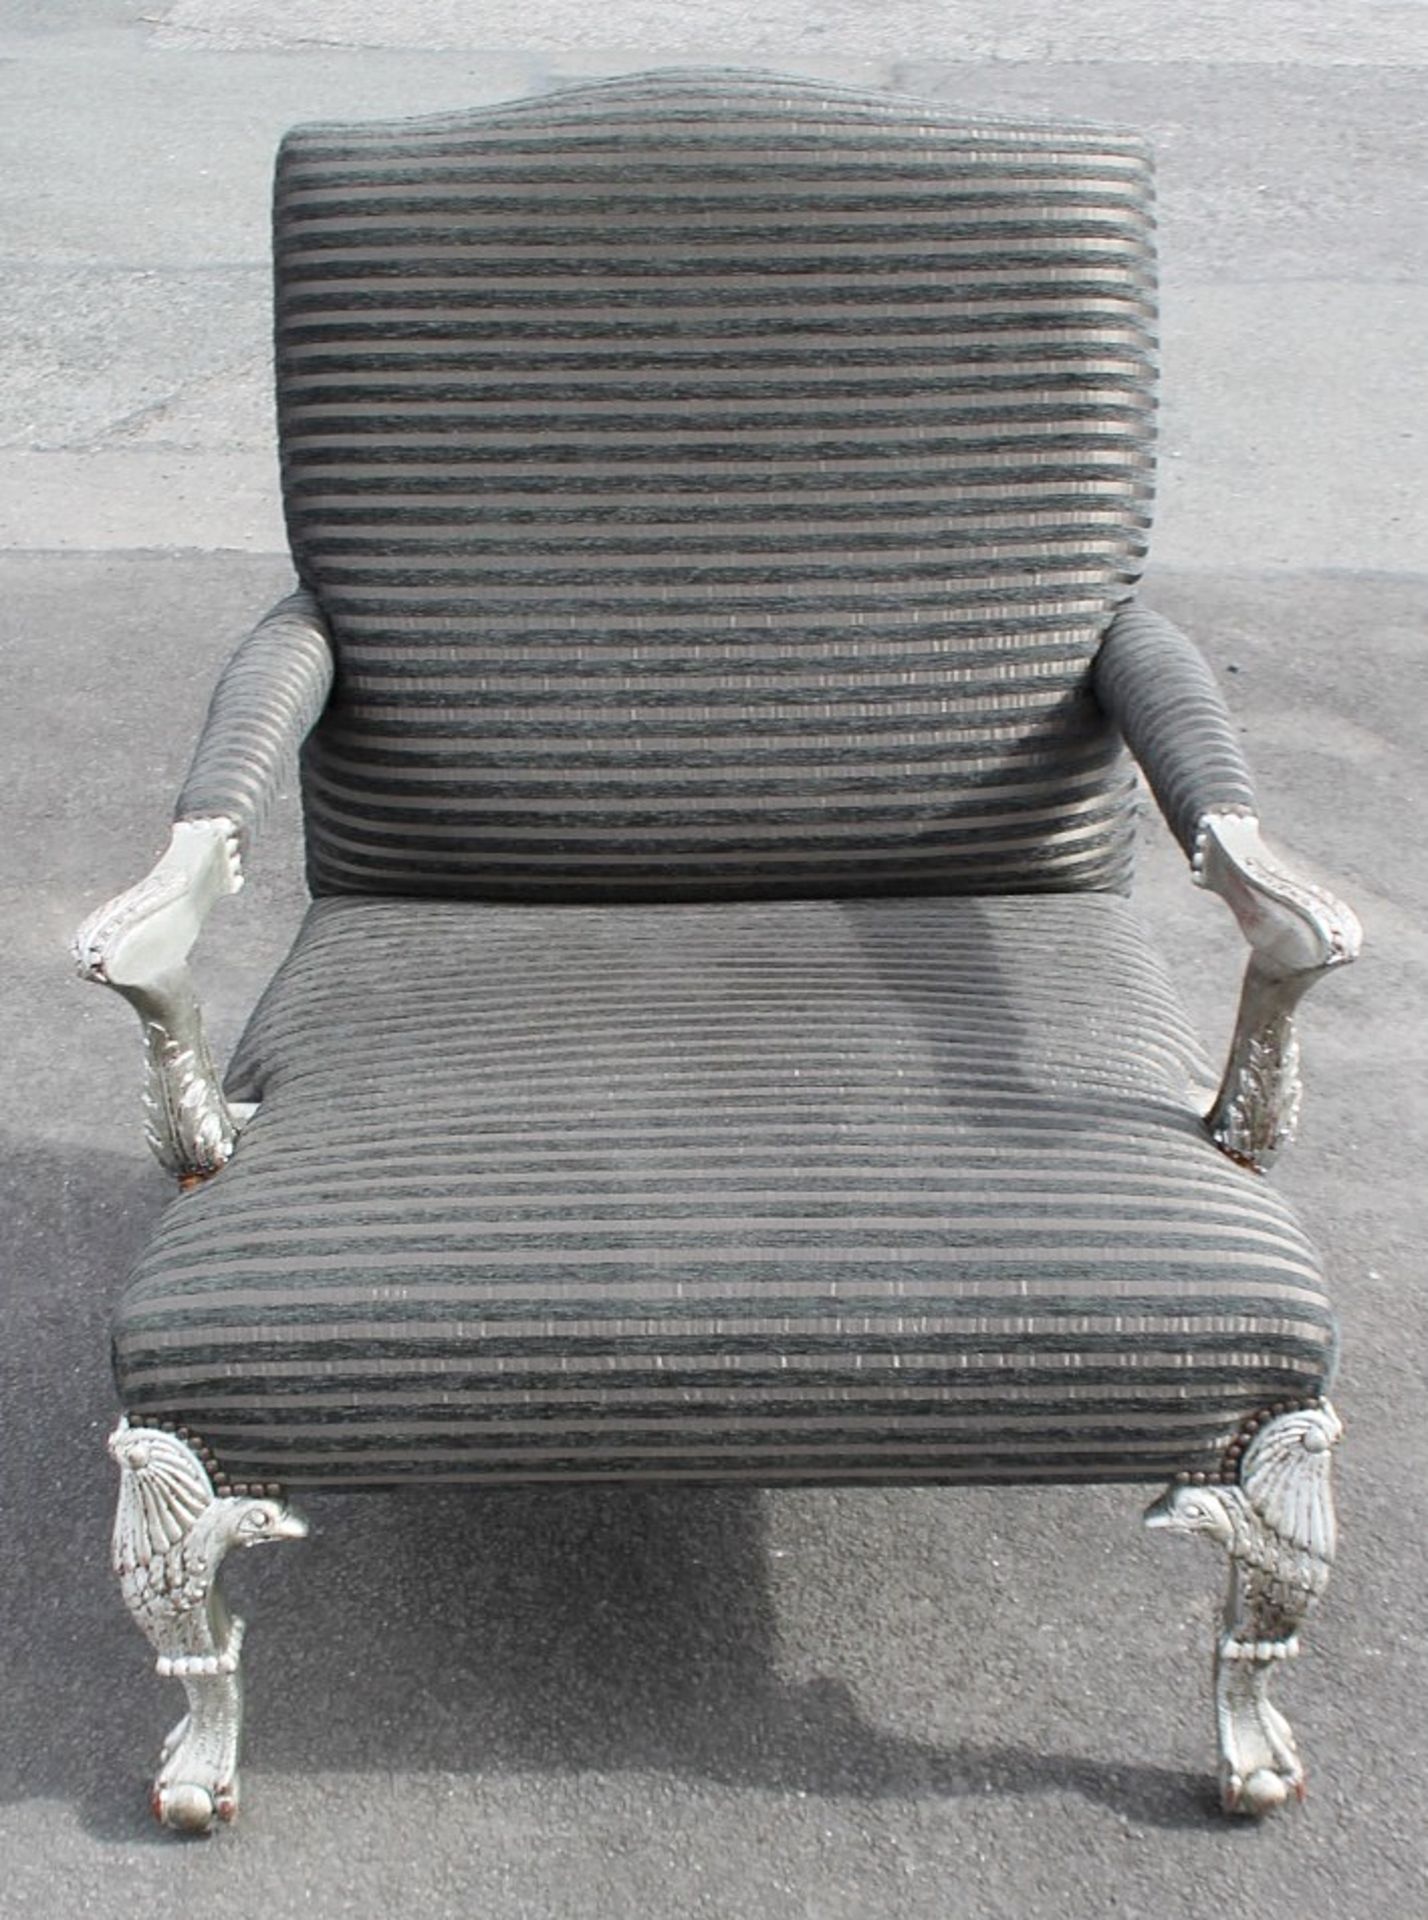 1 x Stylish Oversized Striped Armchair Featuring Carved Ball And Claw Feet With Ball Castors And - Image 3 of 8